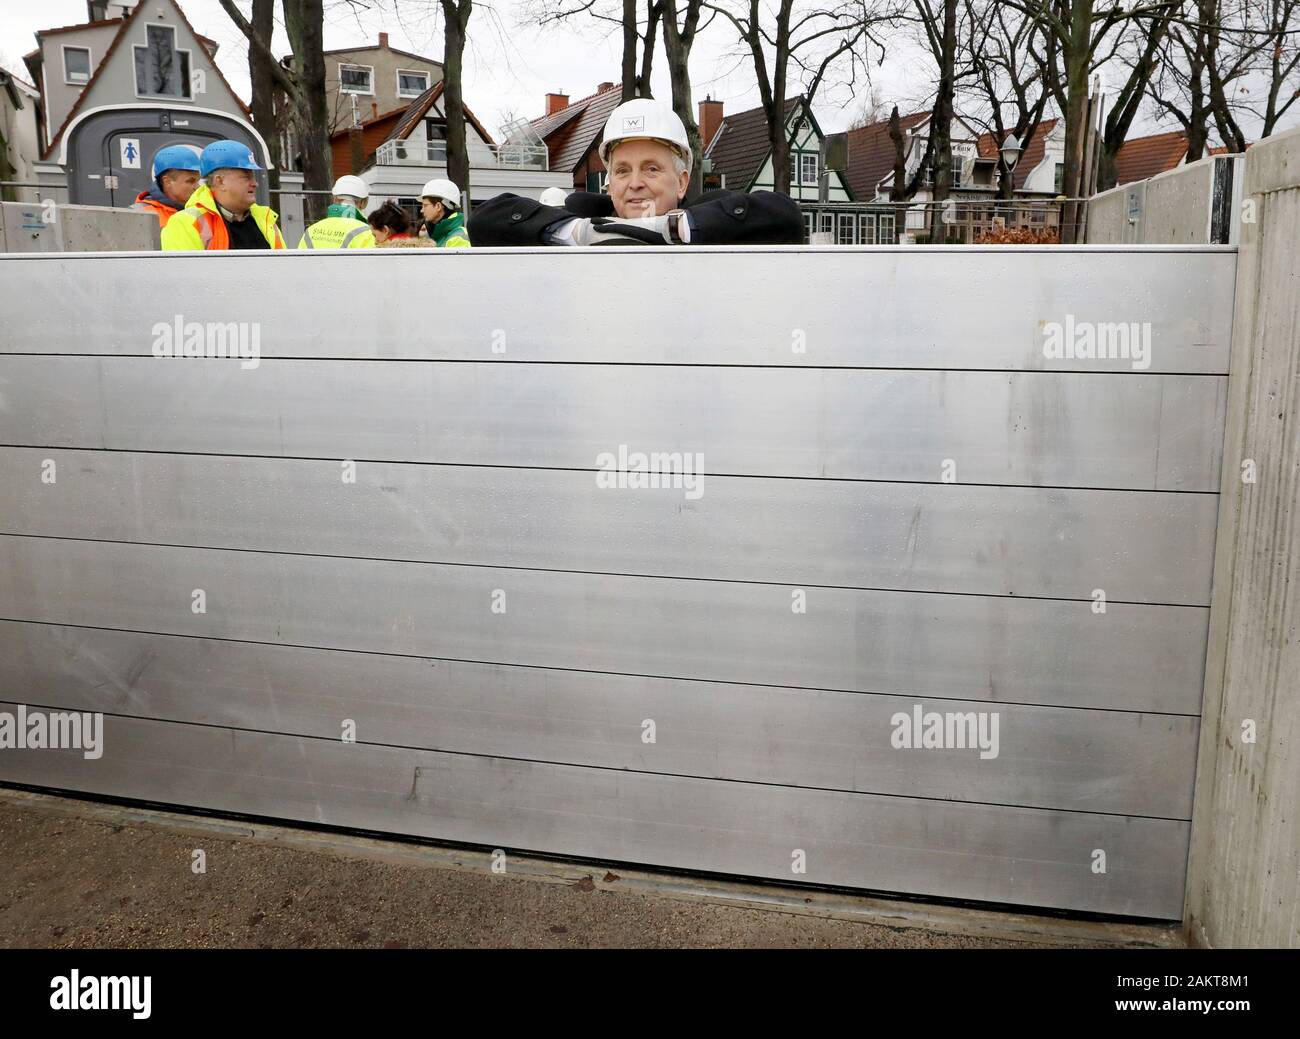 10 January 2020, Mecklenburg-Western Pomerania, Warnemünde: Till Backhaus (SPD, M), Minister for the Environment of the federal state of Baden-Württemberg, looks over a dam beam after the handover of the new storm surge protection wall at the southern Alter Strom after the construction of a dam beam closure, with which passages in the wall can be closed off if necessary. The structure, which is around 500 metres long, is 2.75 metres high and can therefore withstand water levels of up to 2.50. Due to the modular construction it is possible to raise the wall. Photo: Bernd Wüstneck/dpa-Zentralbil Stock Photo